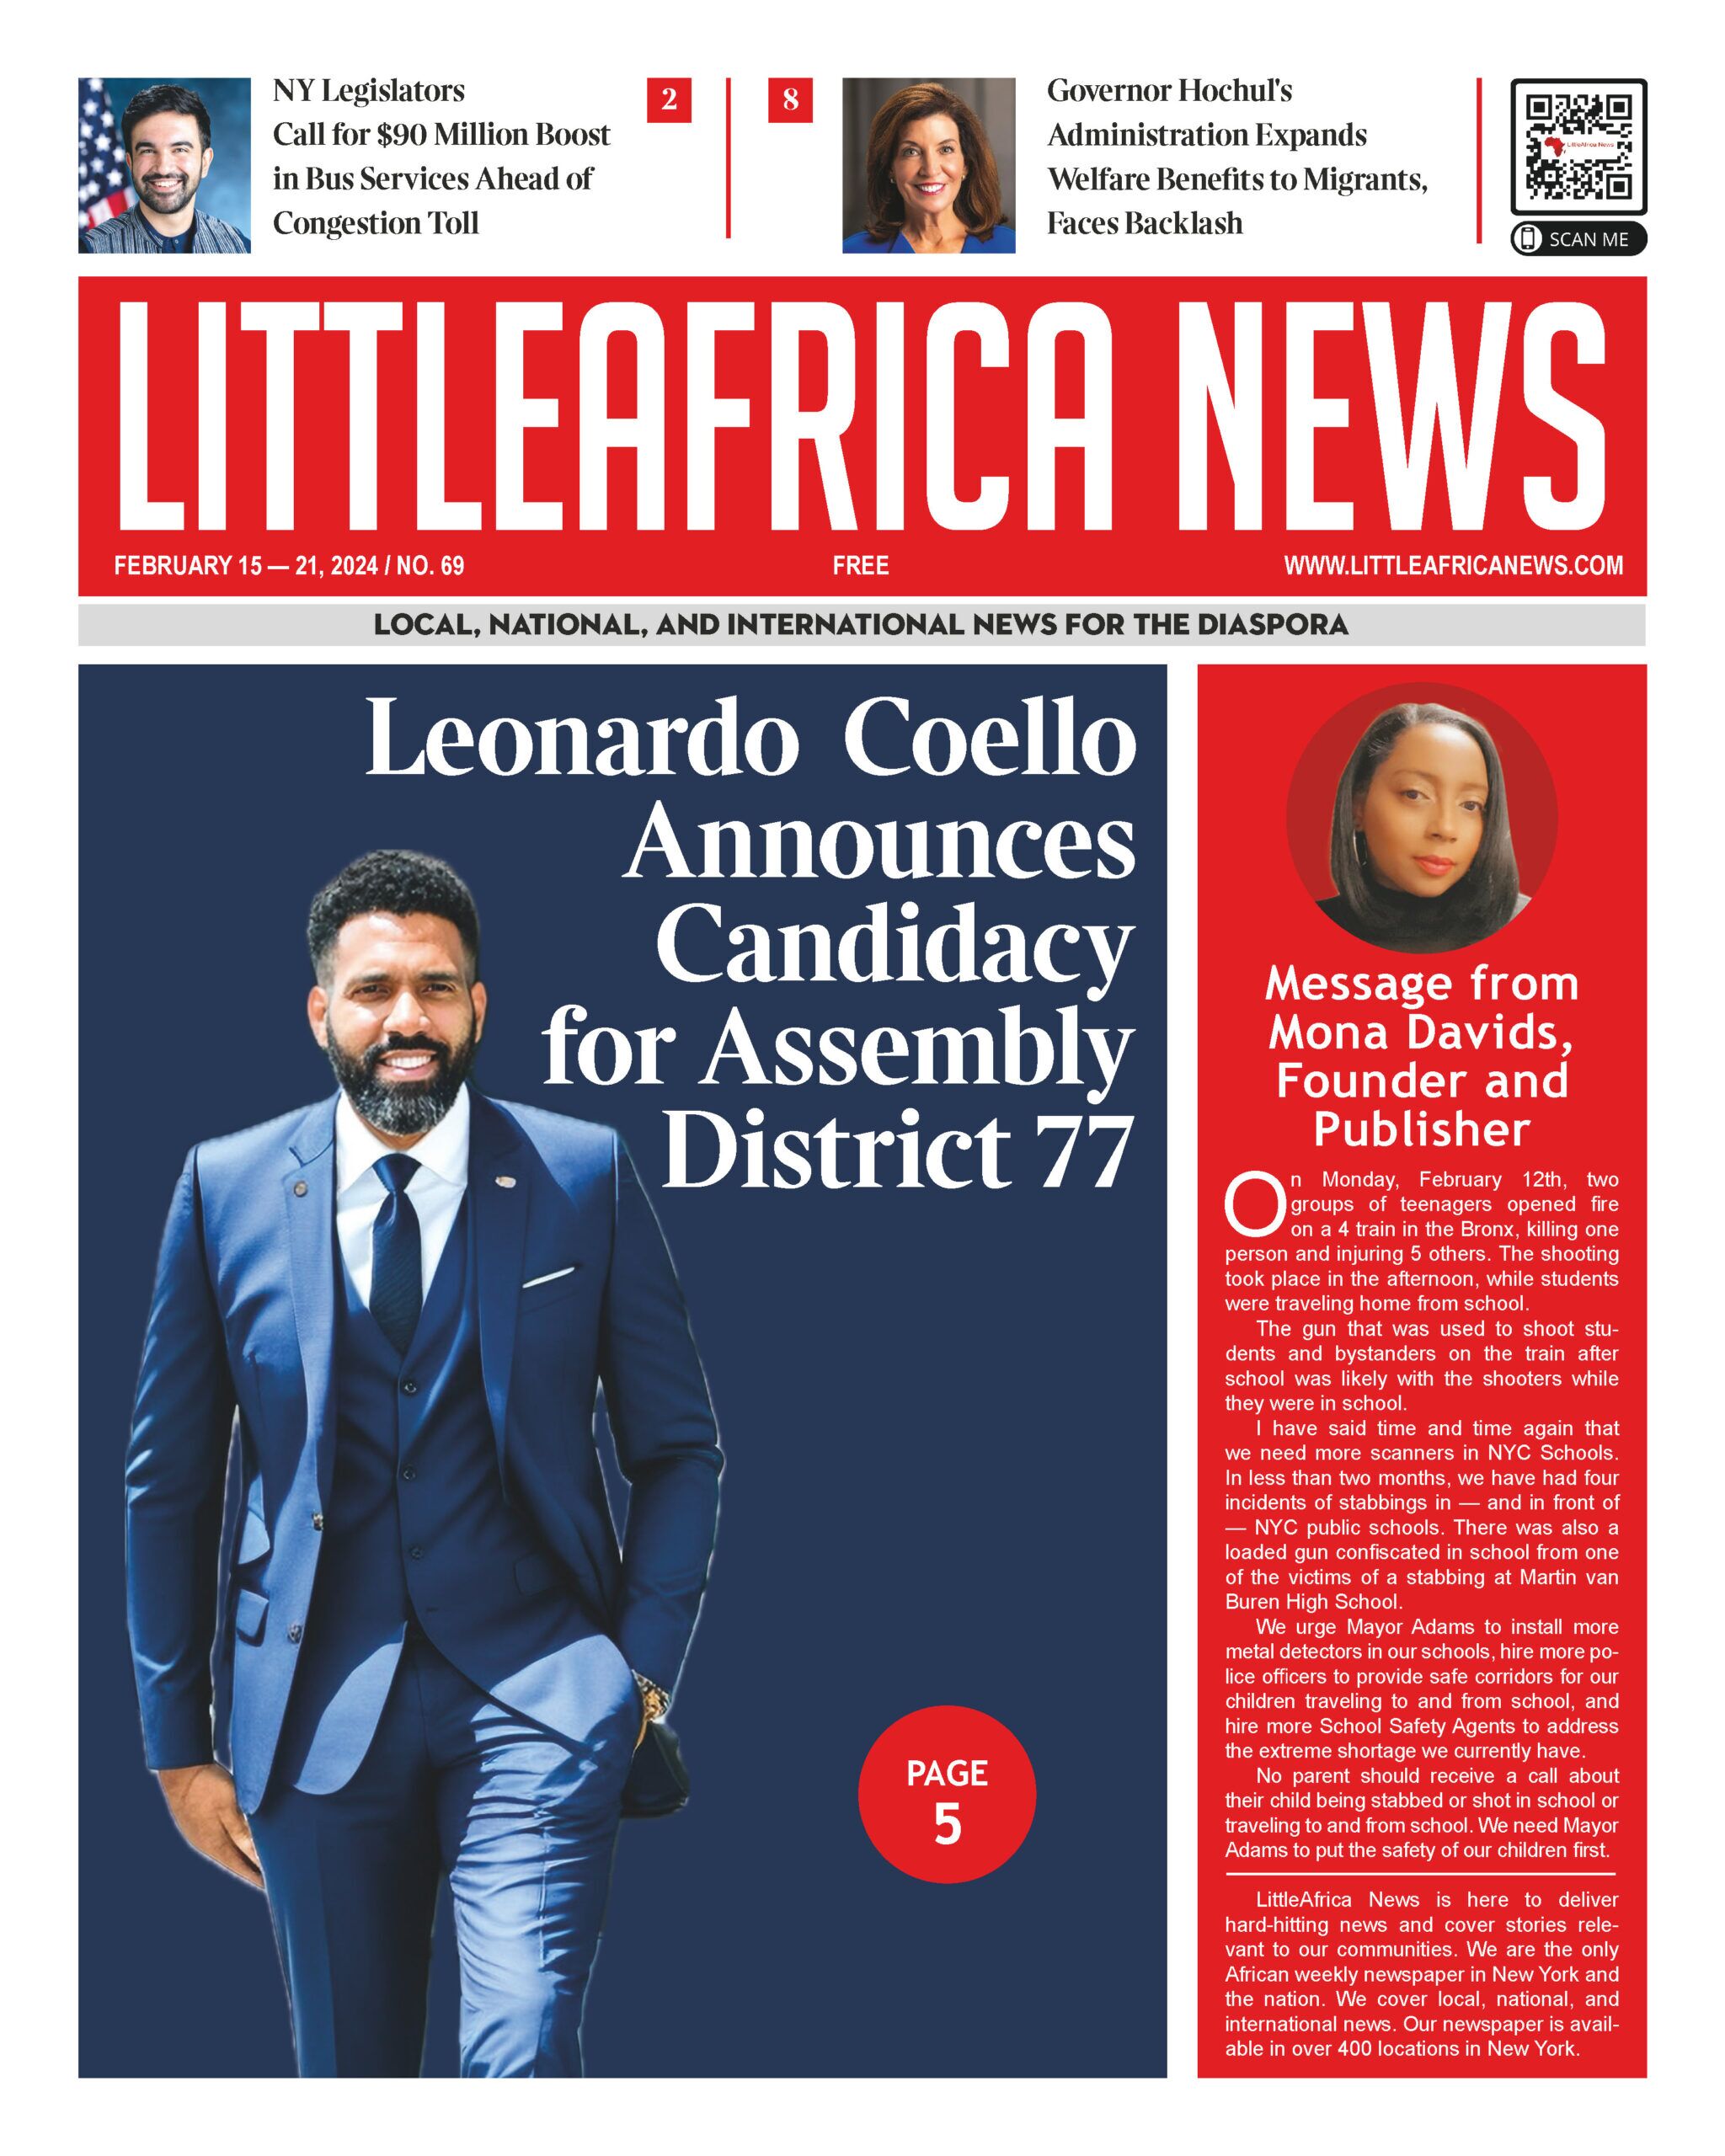 LittleAfrica News Newspaper_FrontPage_February15-21_2024